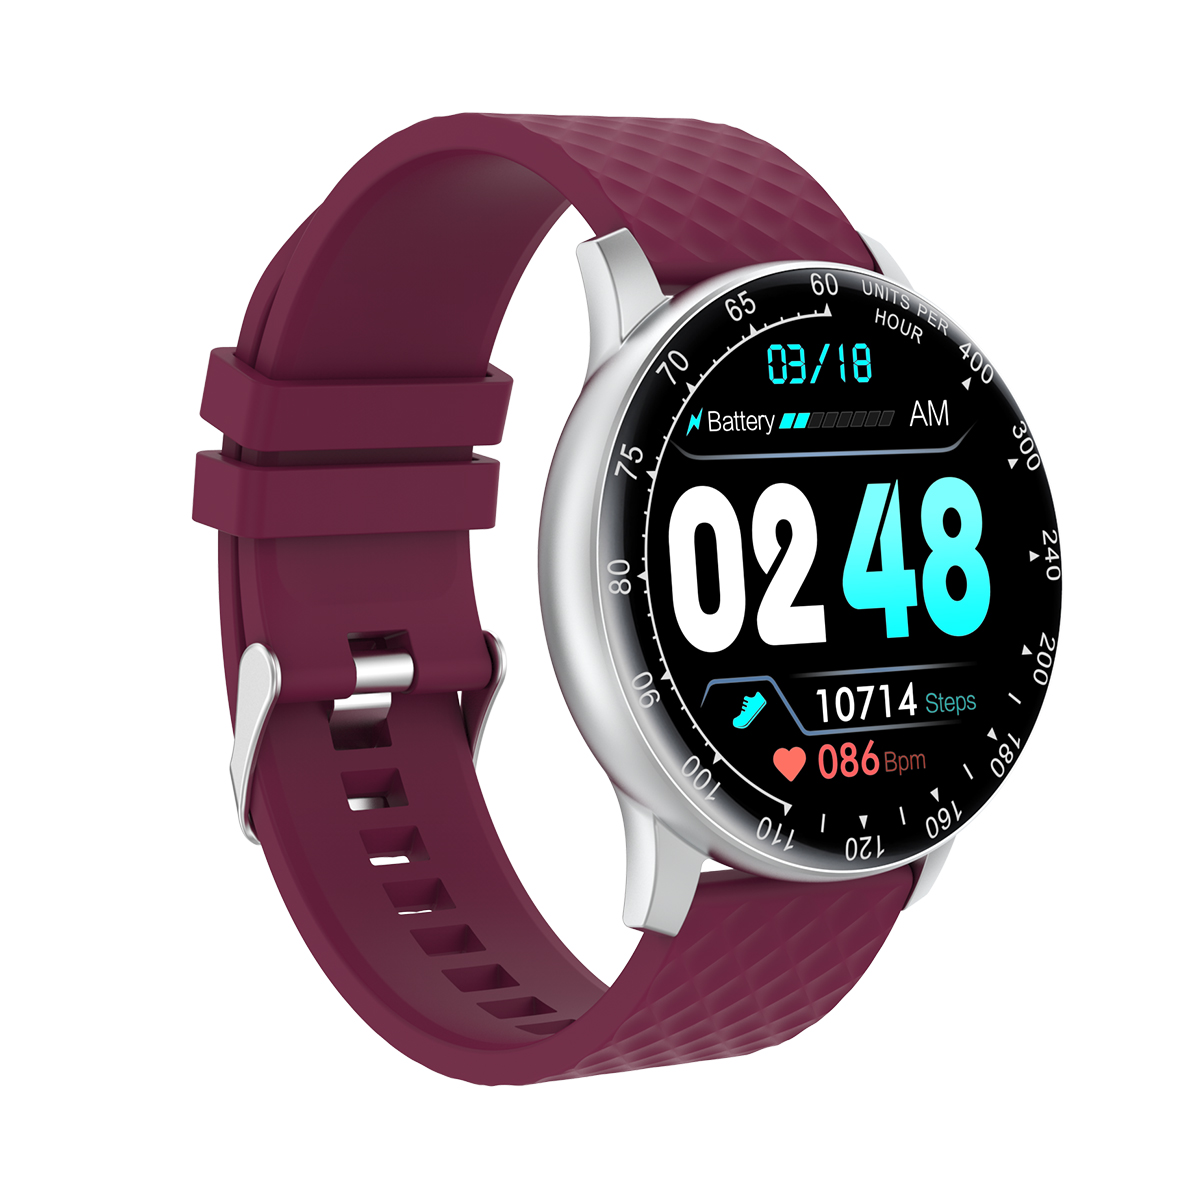 IP67 Precise Heart Rate Blood Pressure SpO2 Monitoring Smart Sport Watch for Women H30